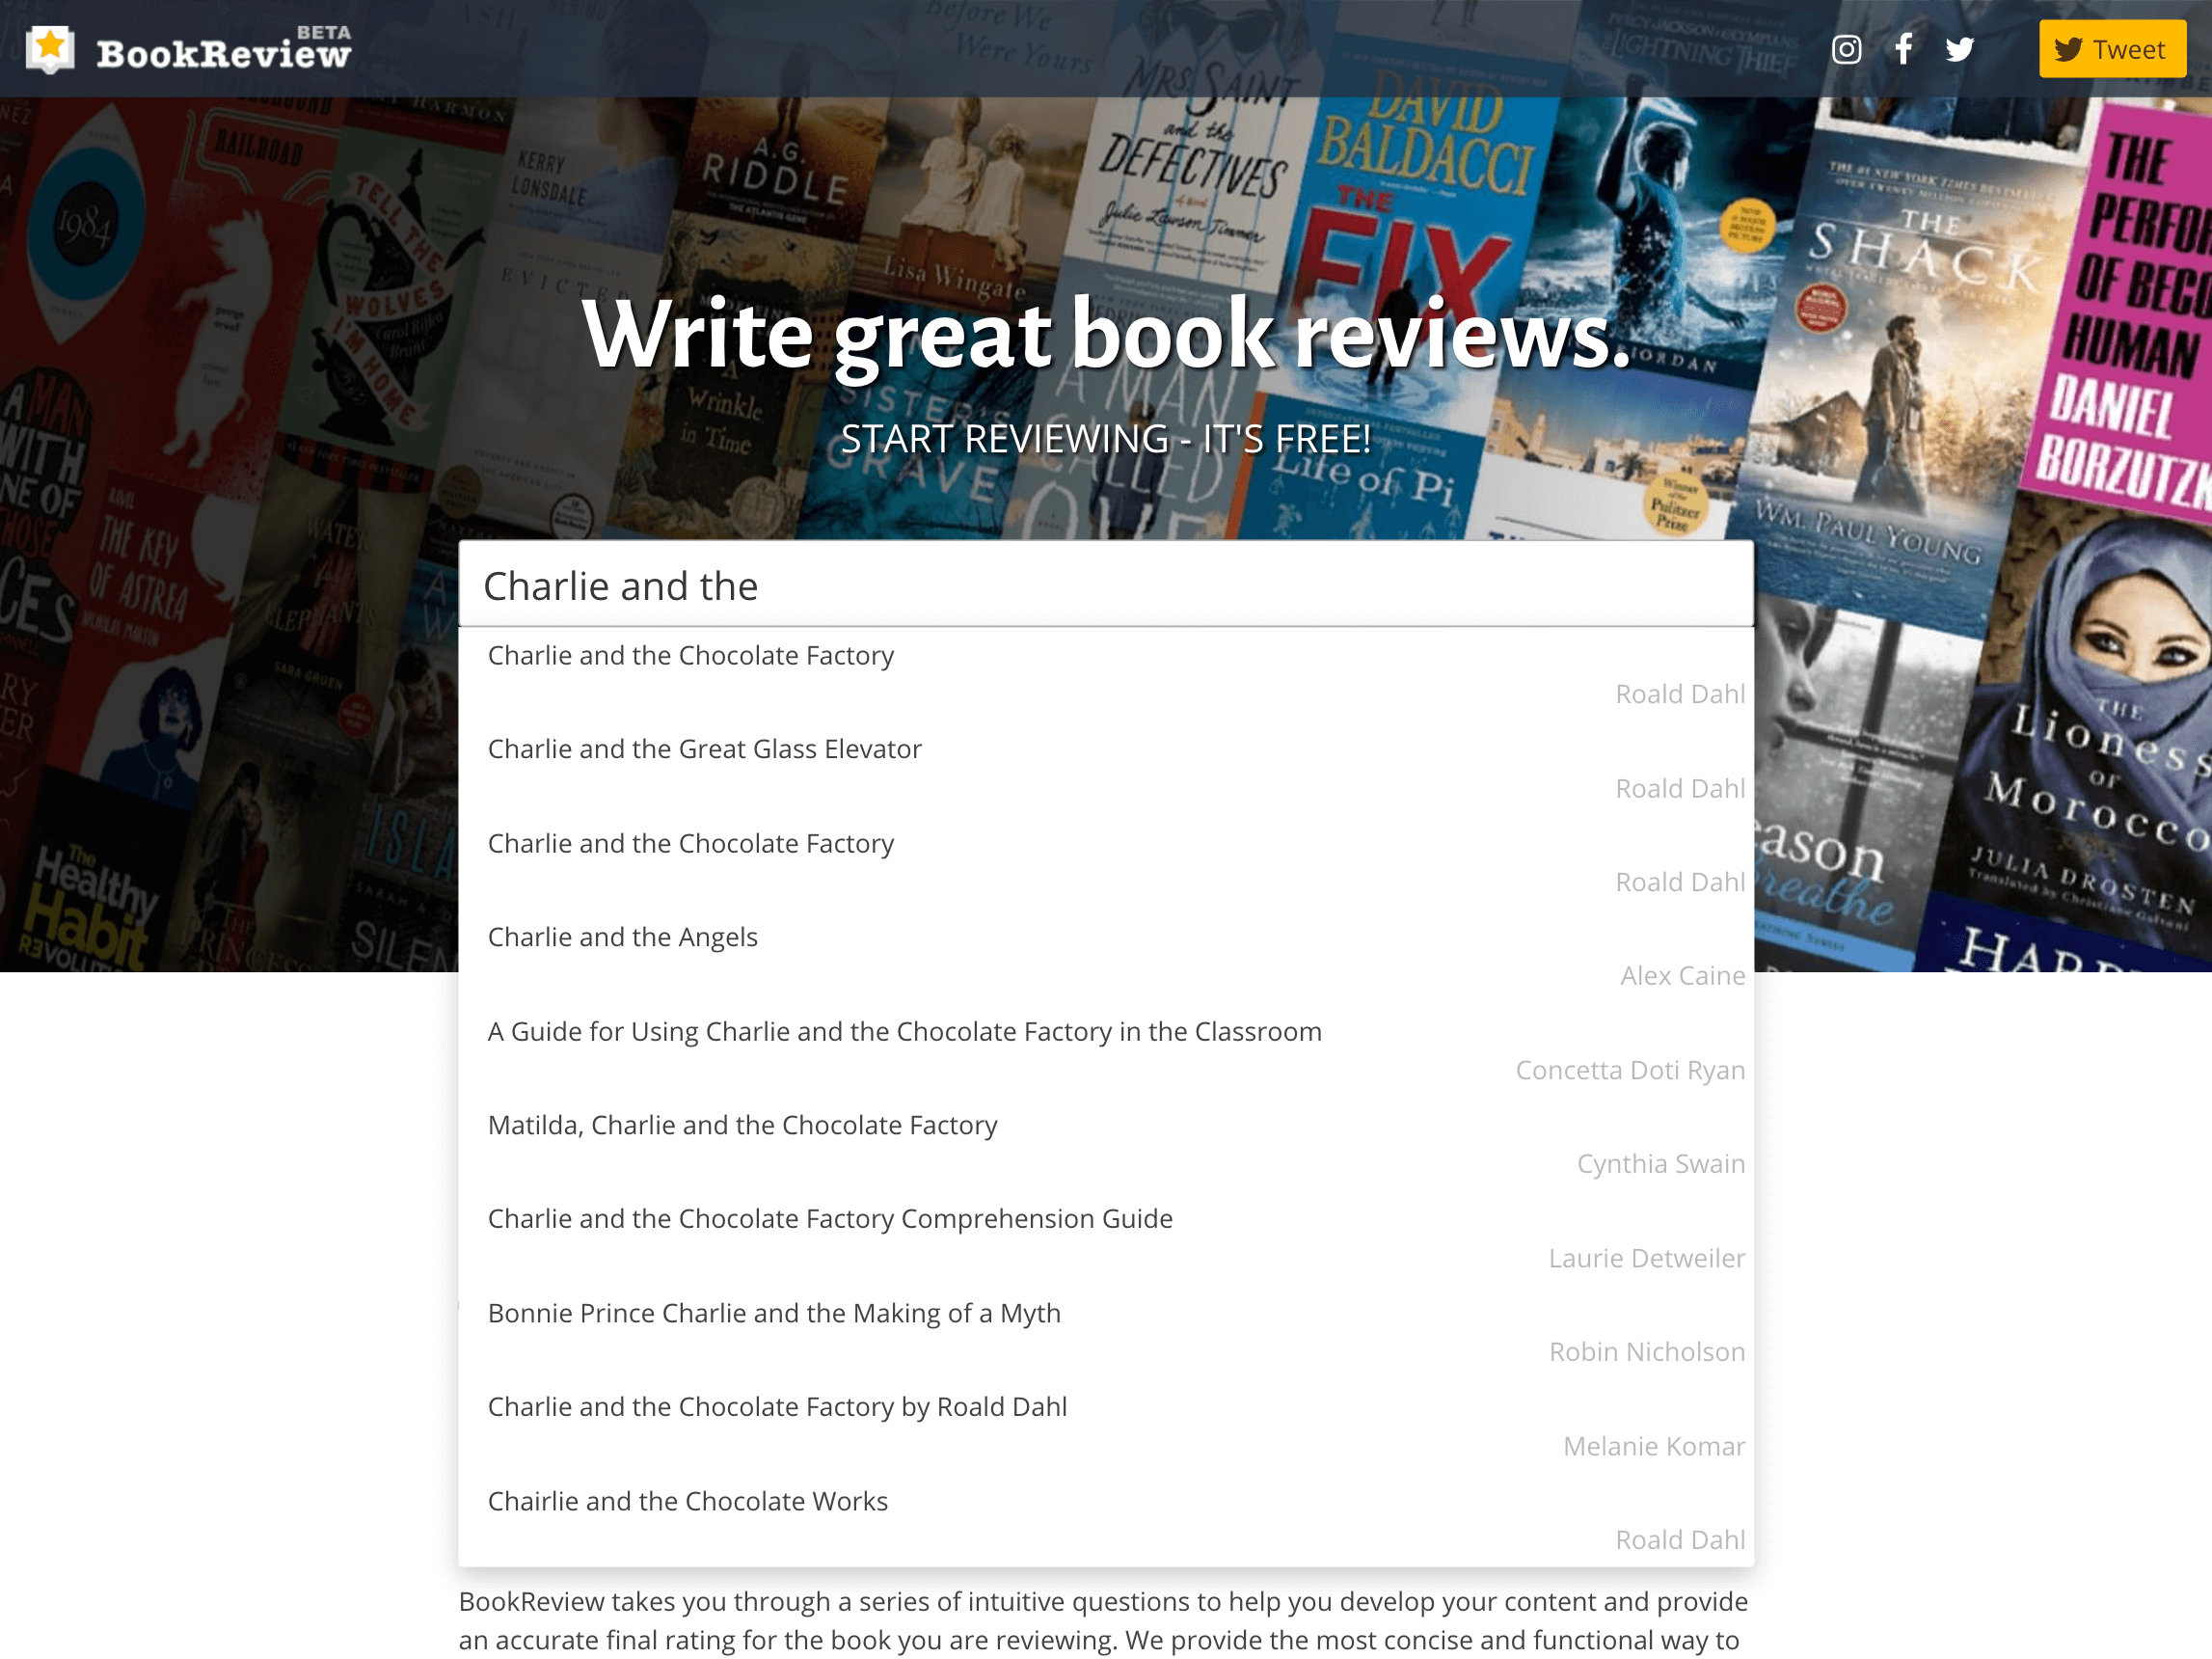 BookReview home page